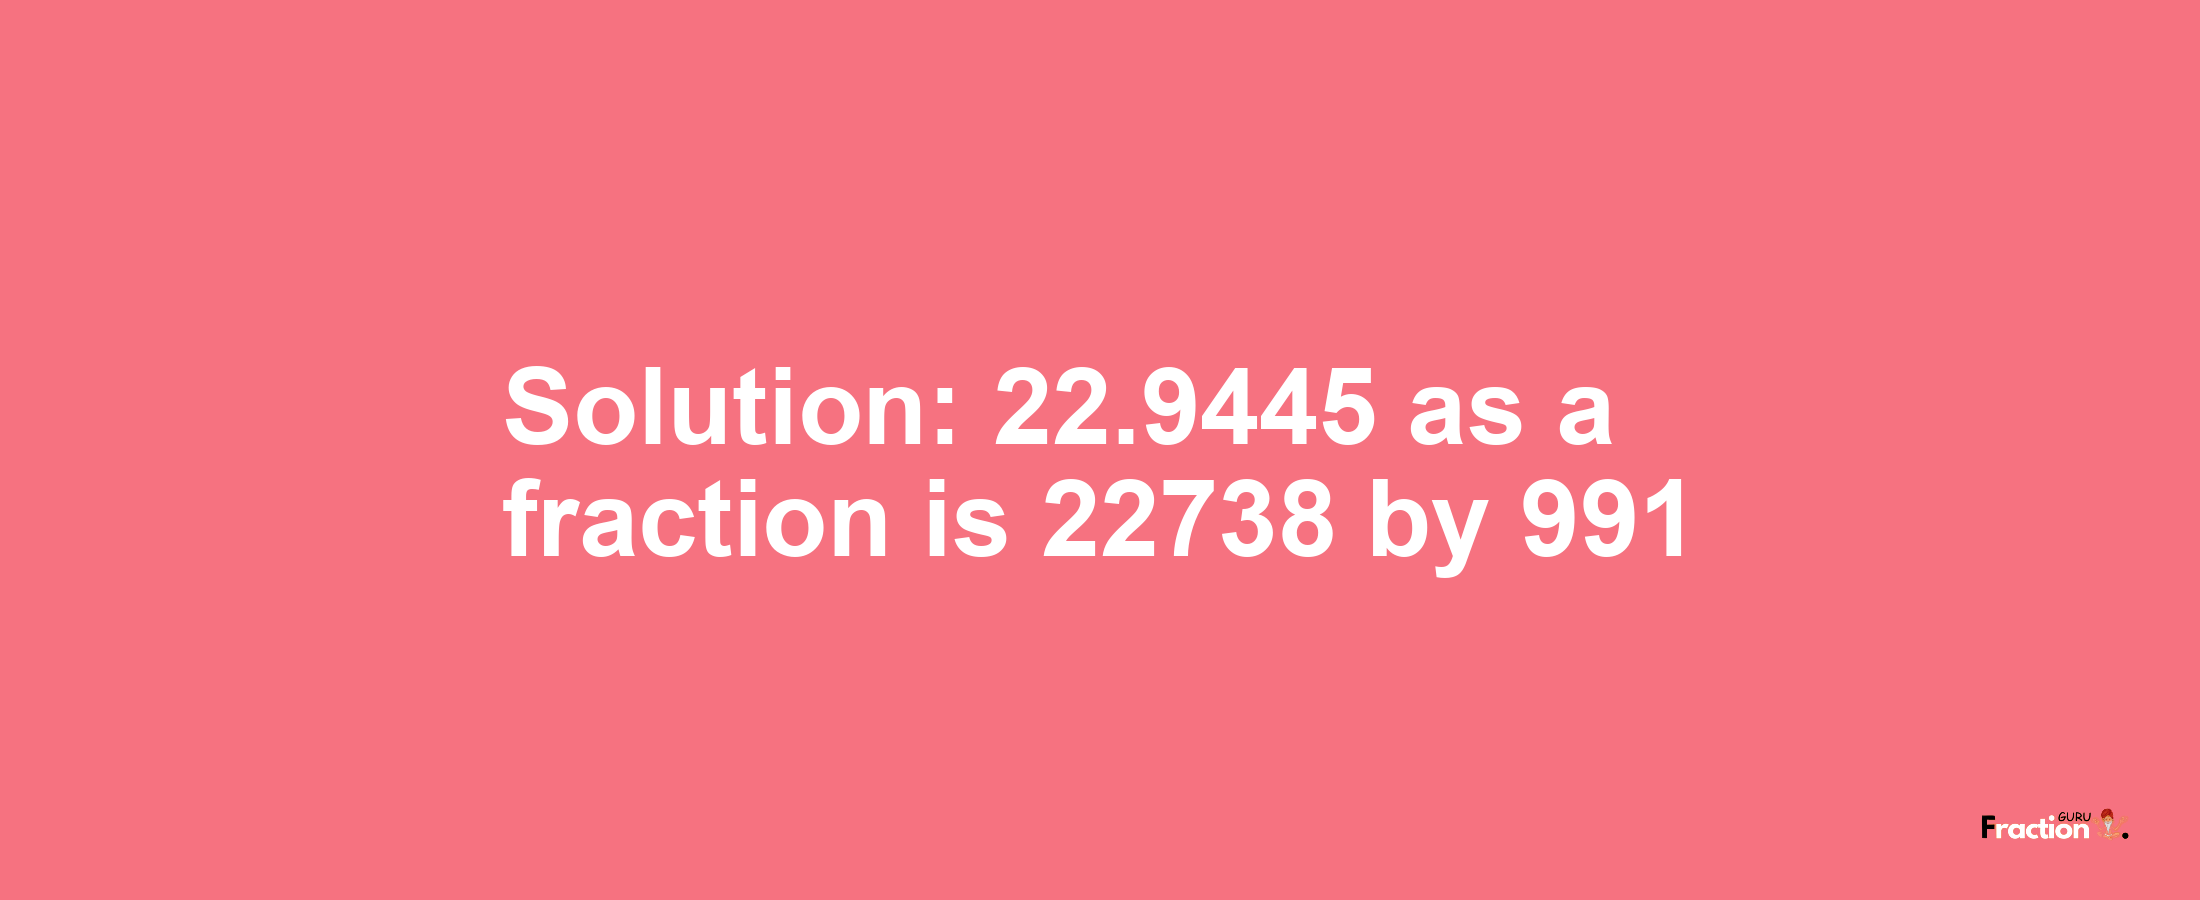 Solution:22.9445 as a fraction is 22738/991